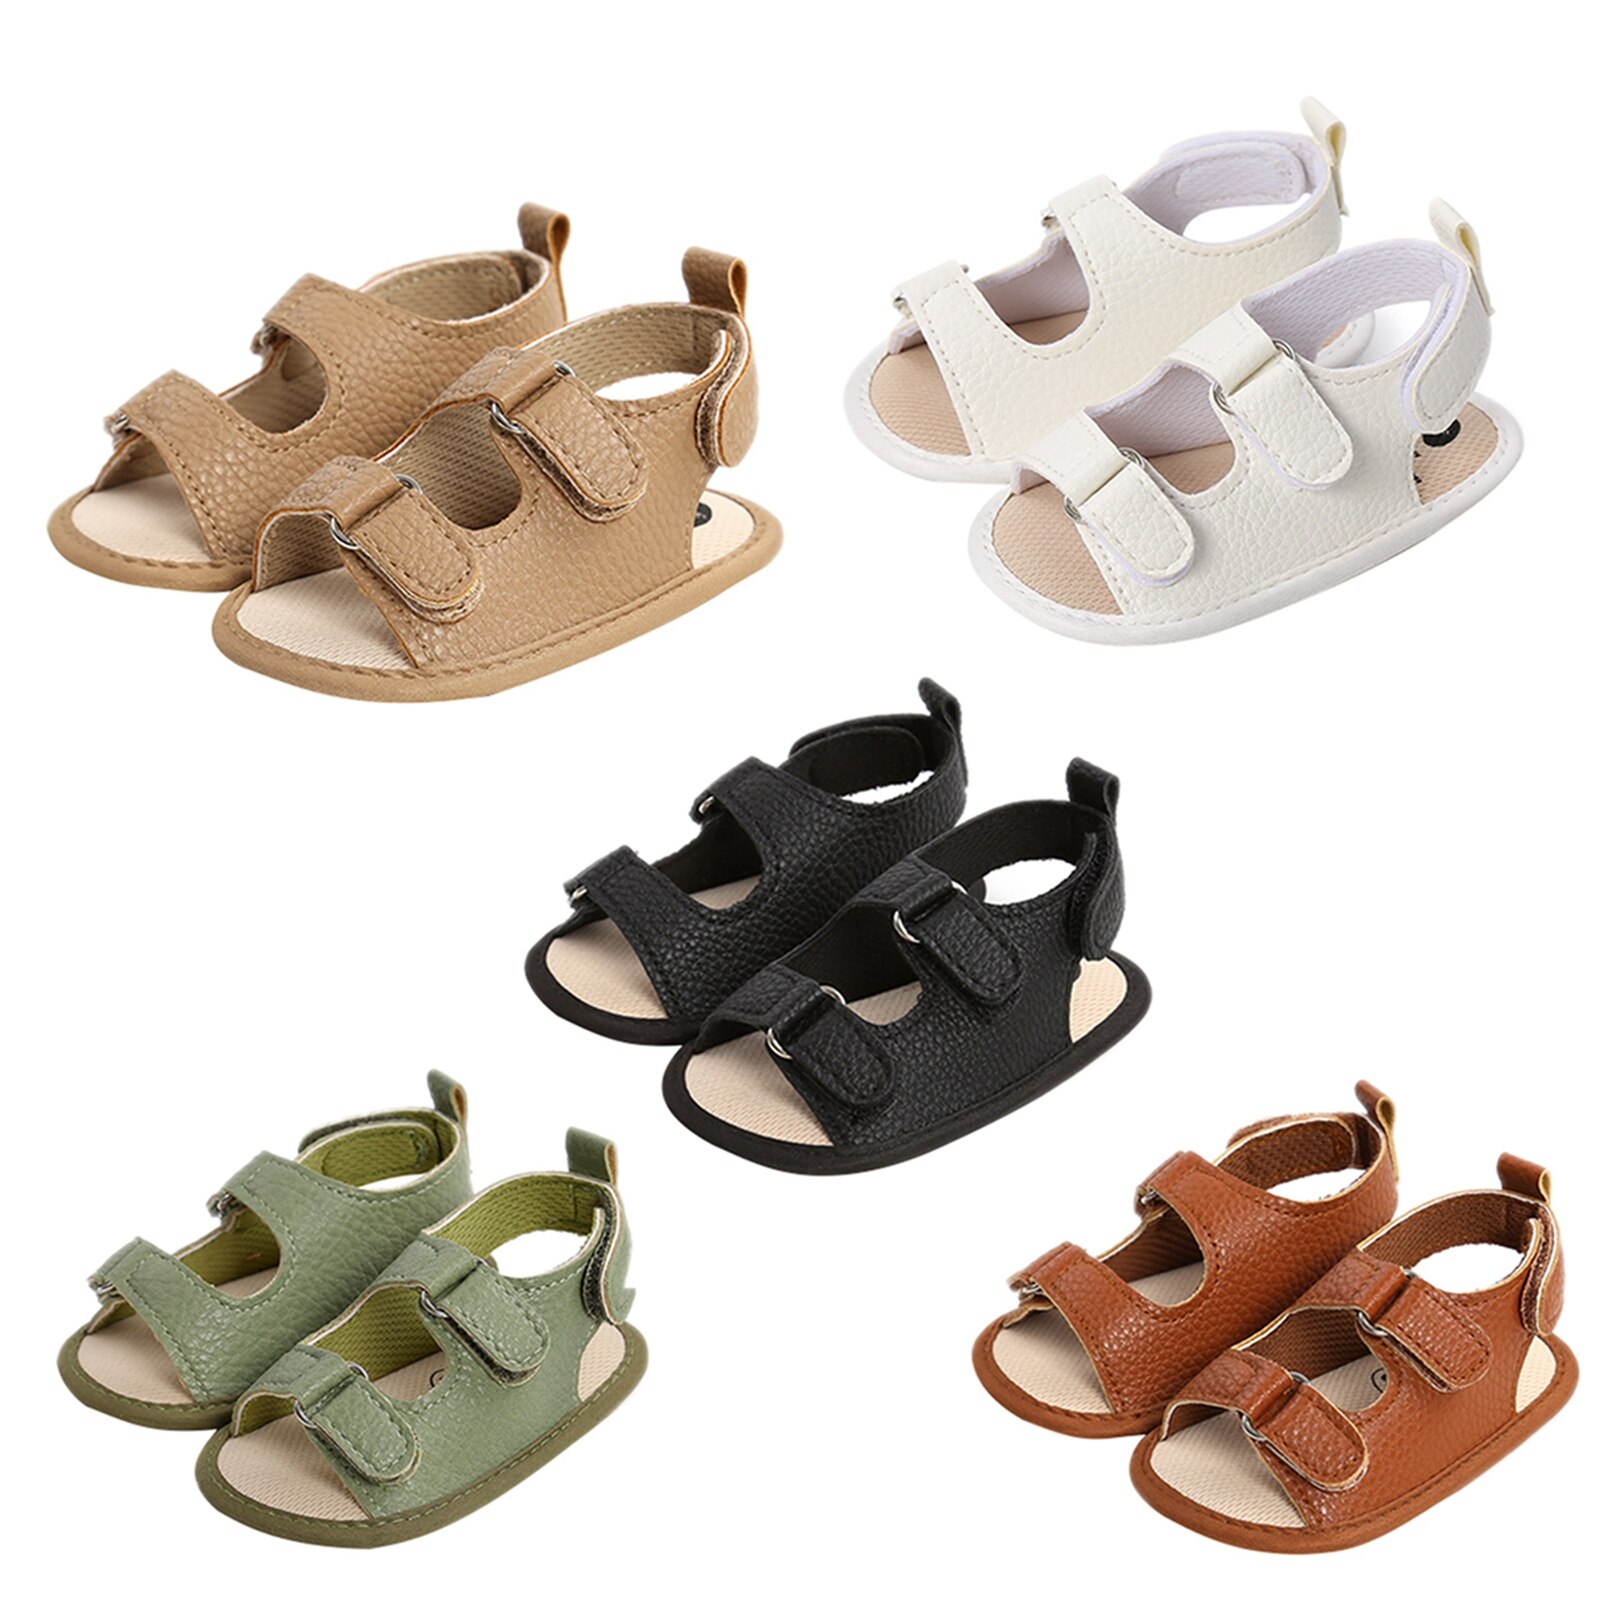 New Baby Sandals Baby Shoes Baby Boy Girl Sandals PU Soft Bottom Sole Anti